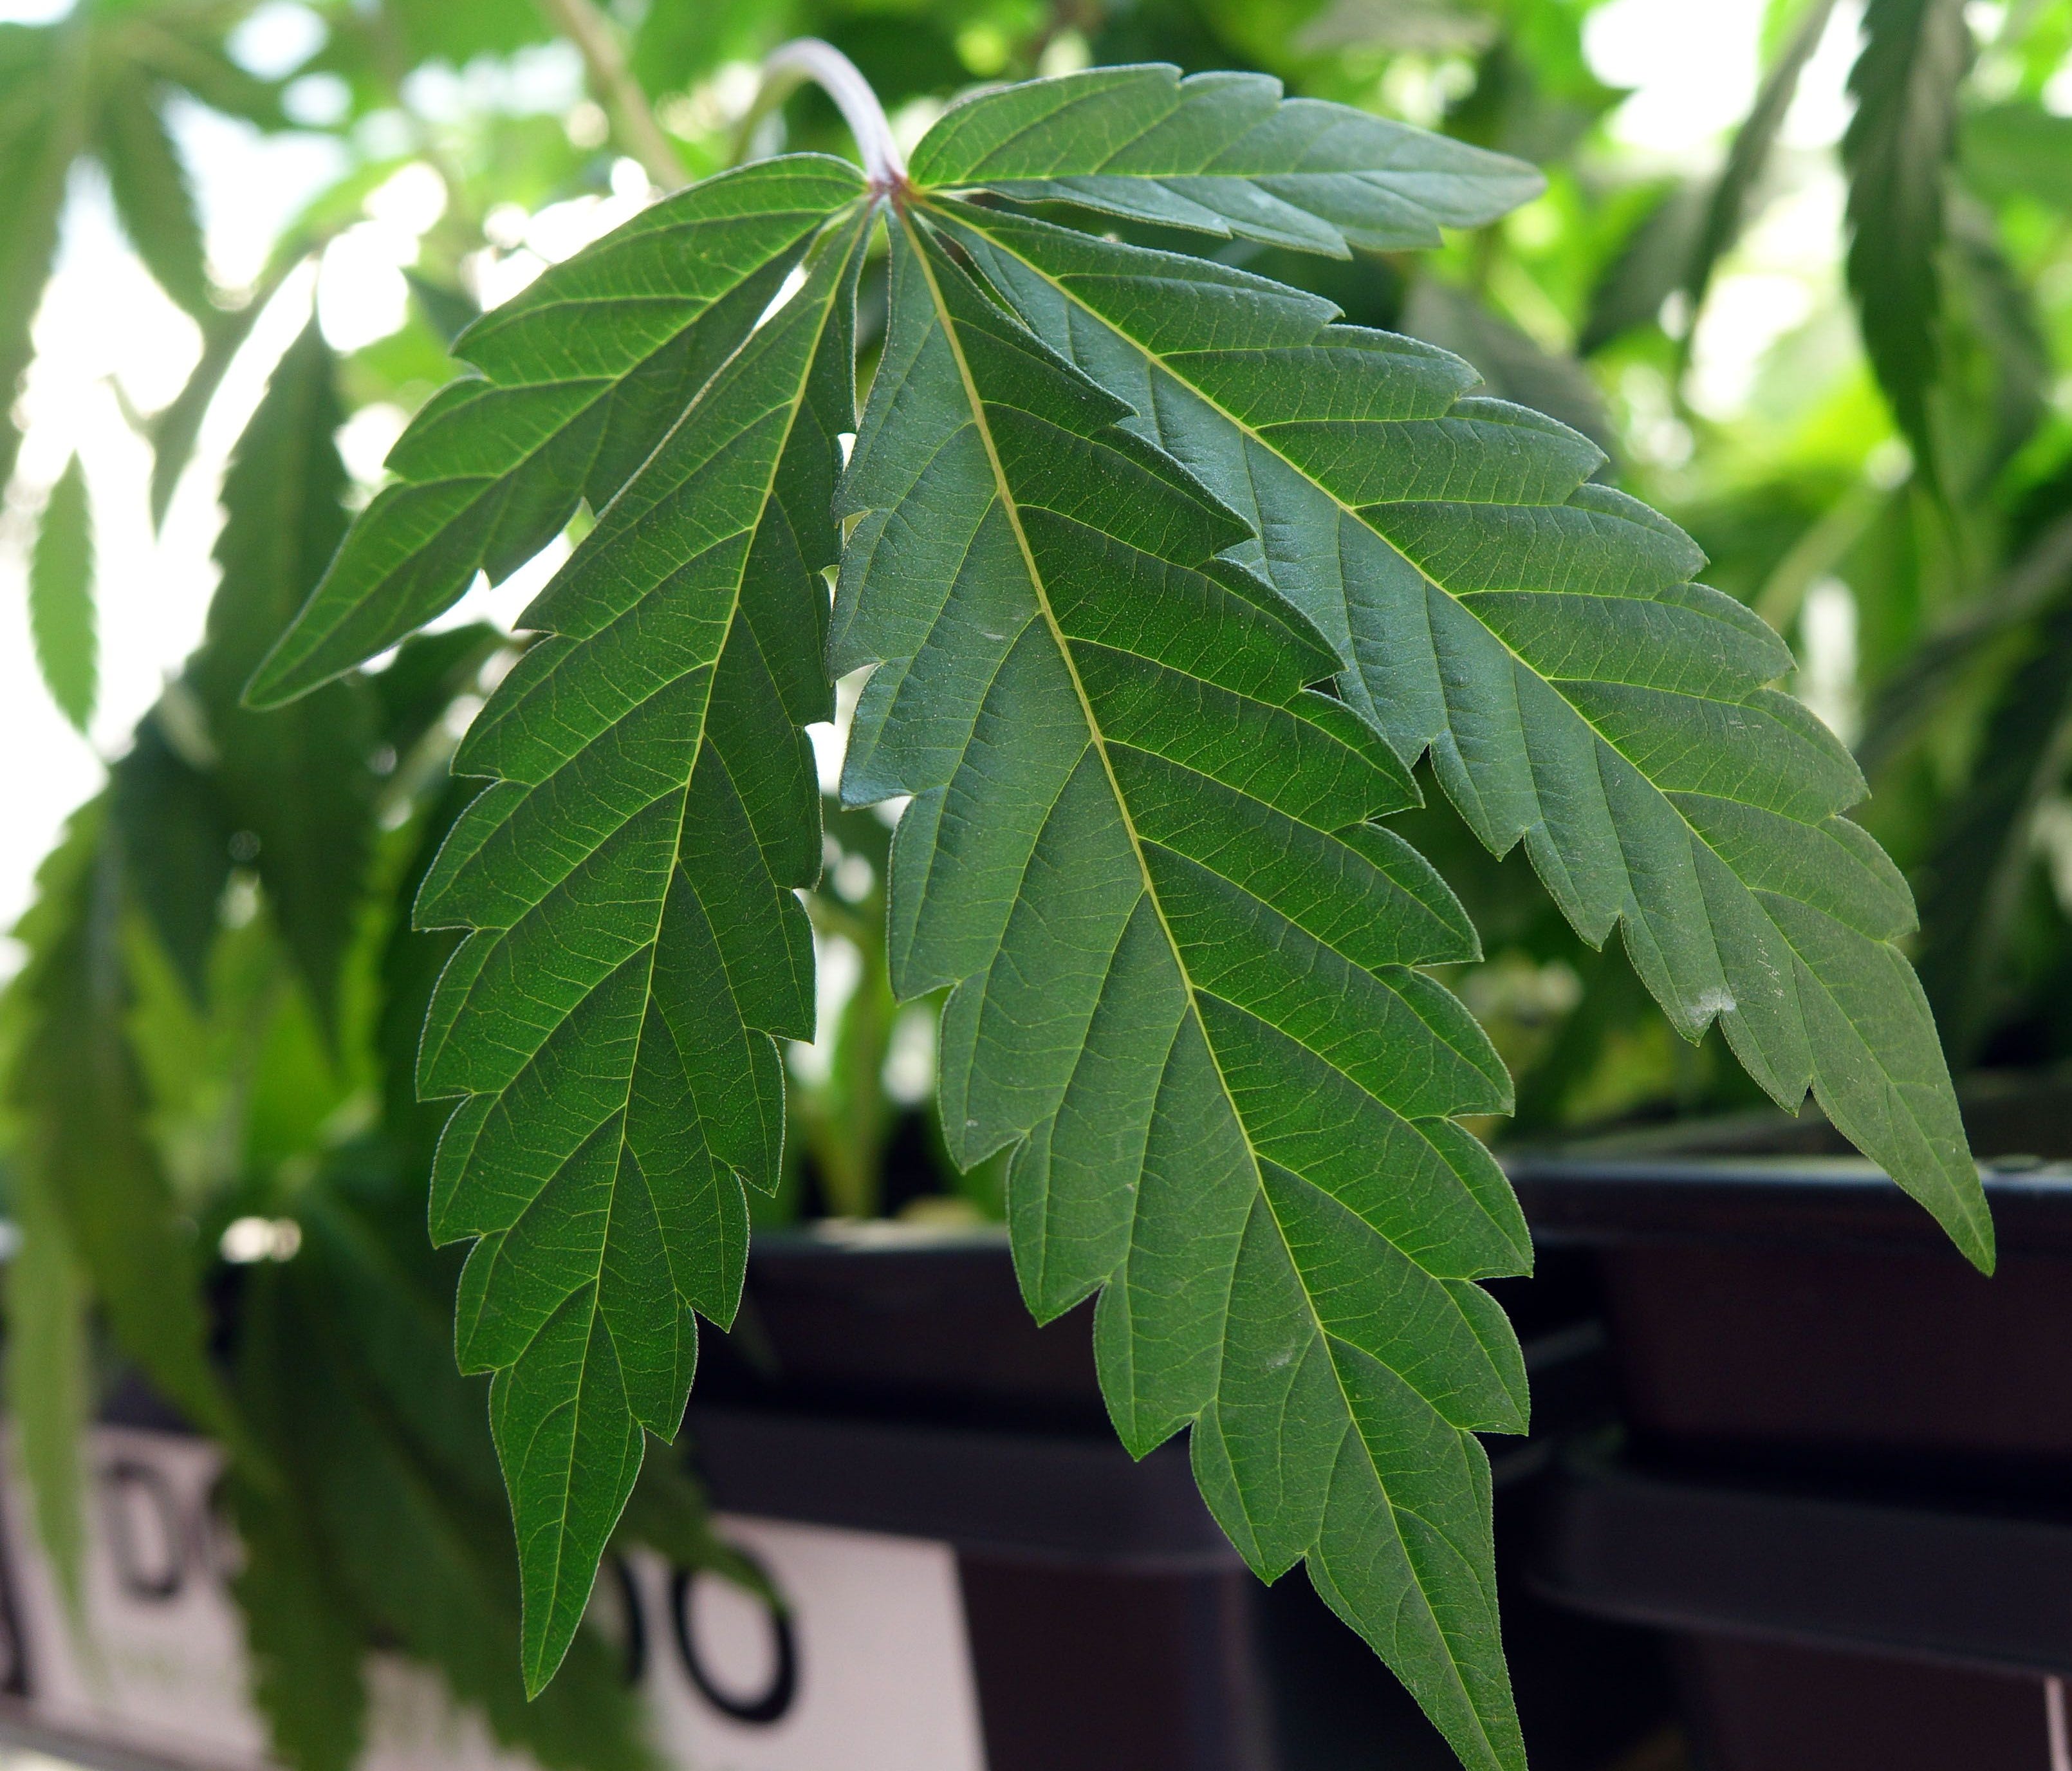 Marijuana clones are offered for sale at Harbourside Health Center in Oakland, Calif.